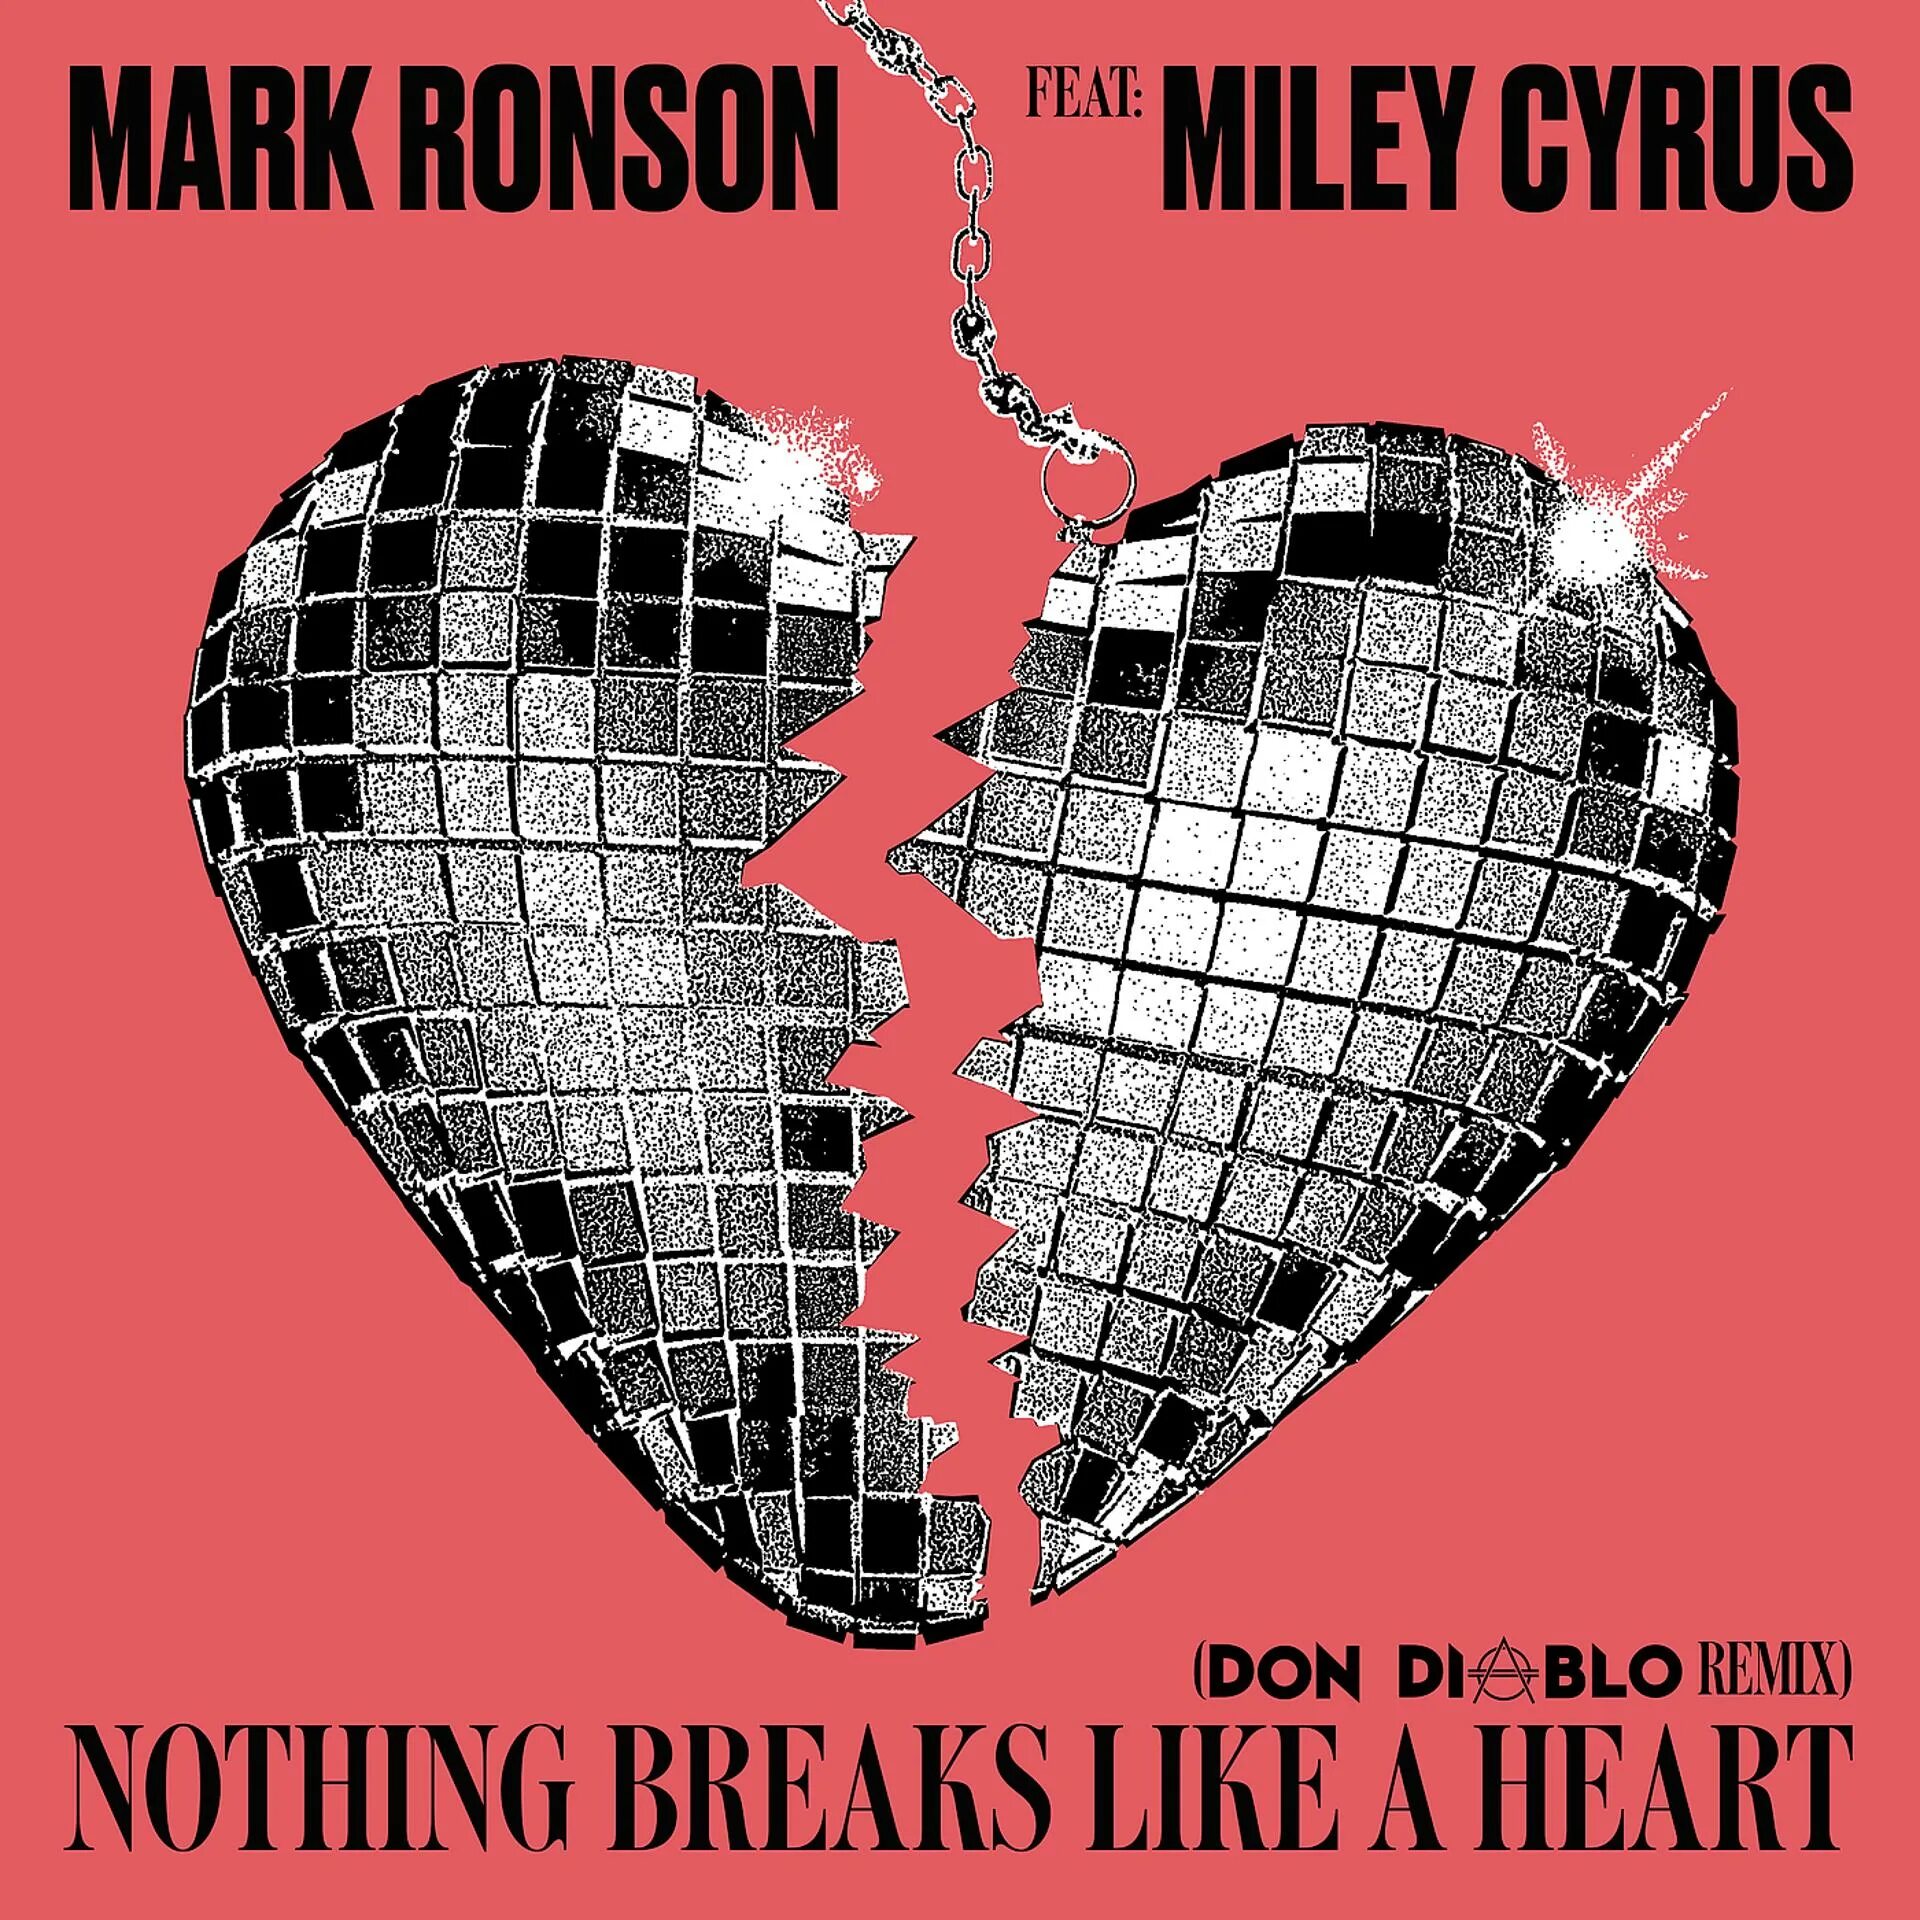 Nothing like a heart. Mark Ronson nothing Breaks like a Heart. Mark Ronson Miley. Mark Ronson Miley Cyrus nothing Breaks. Майли Сайрус nothing Breaks like a Heart.